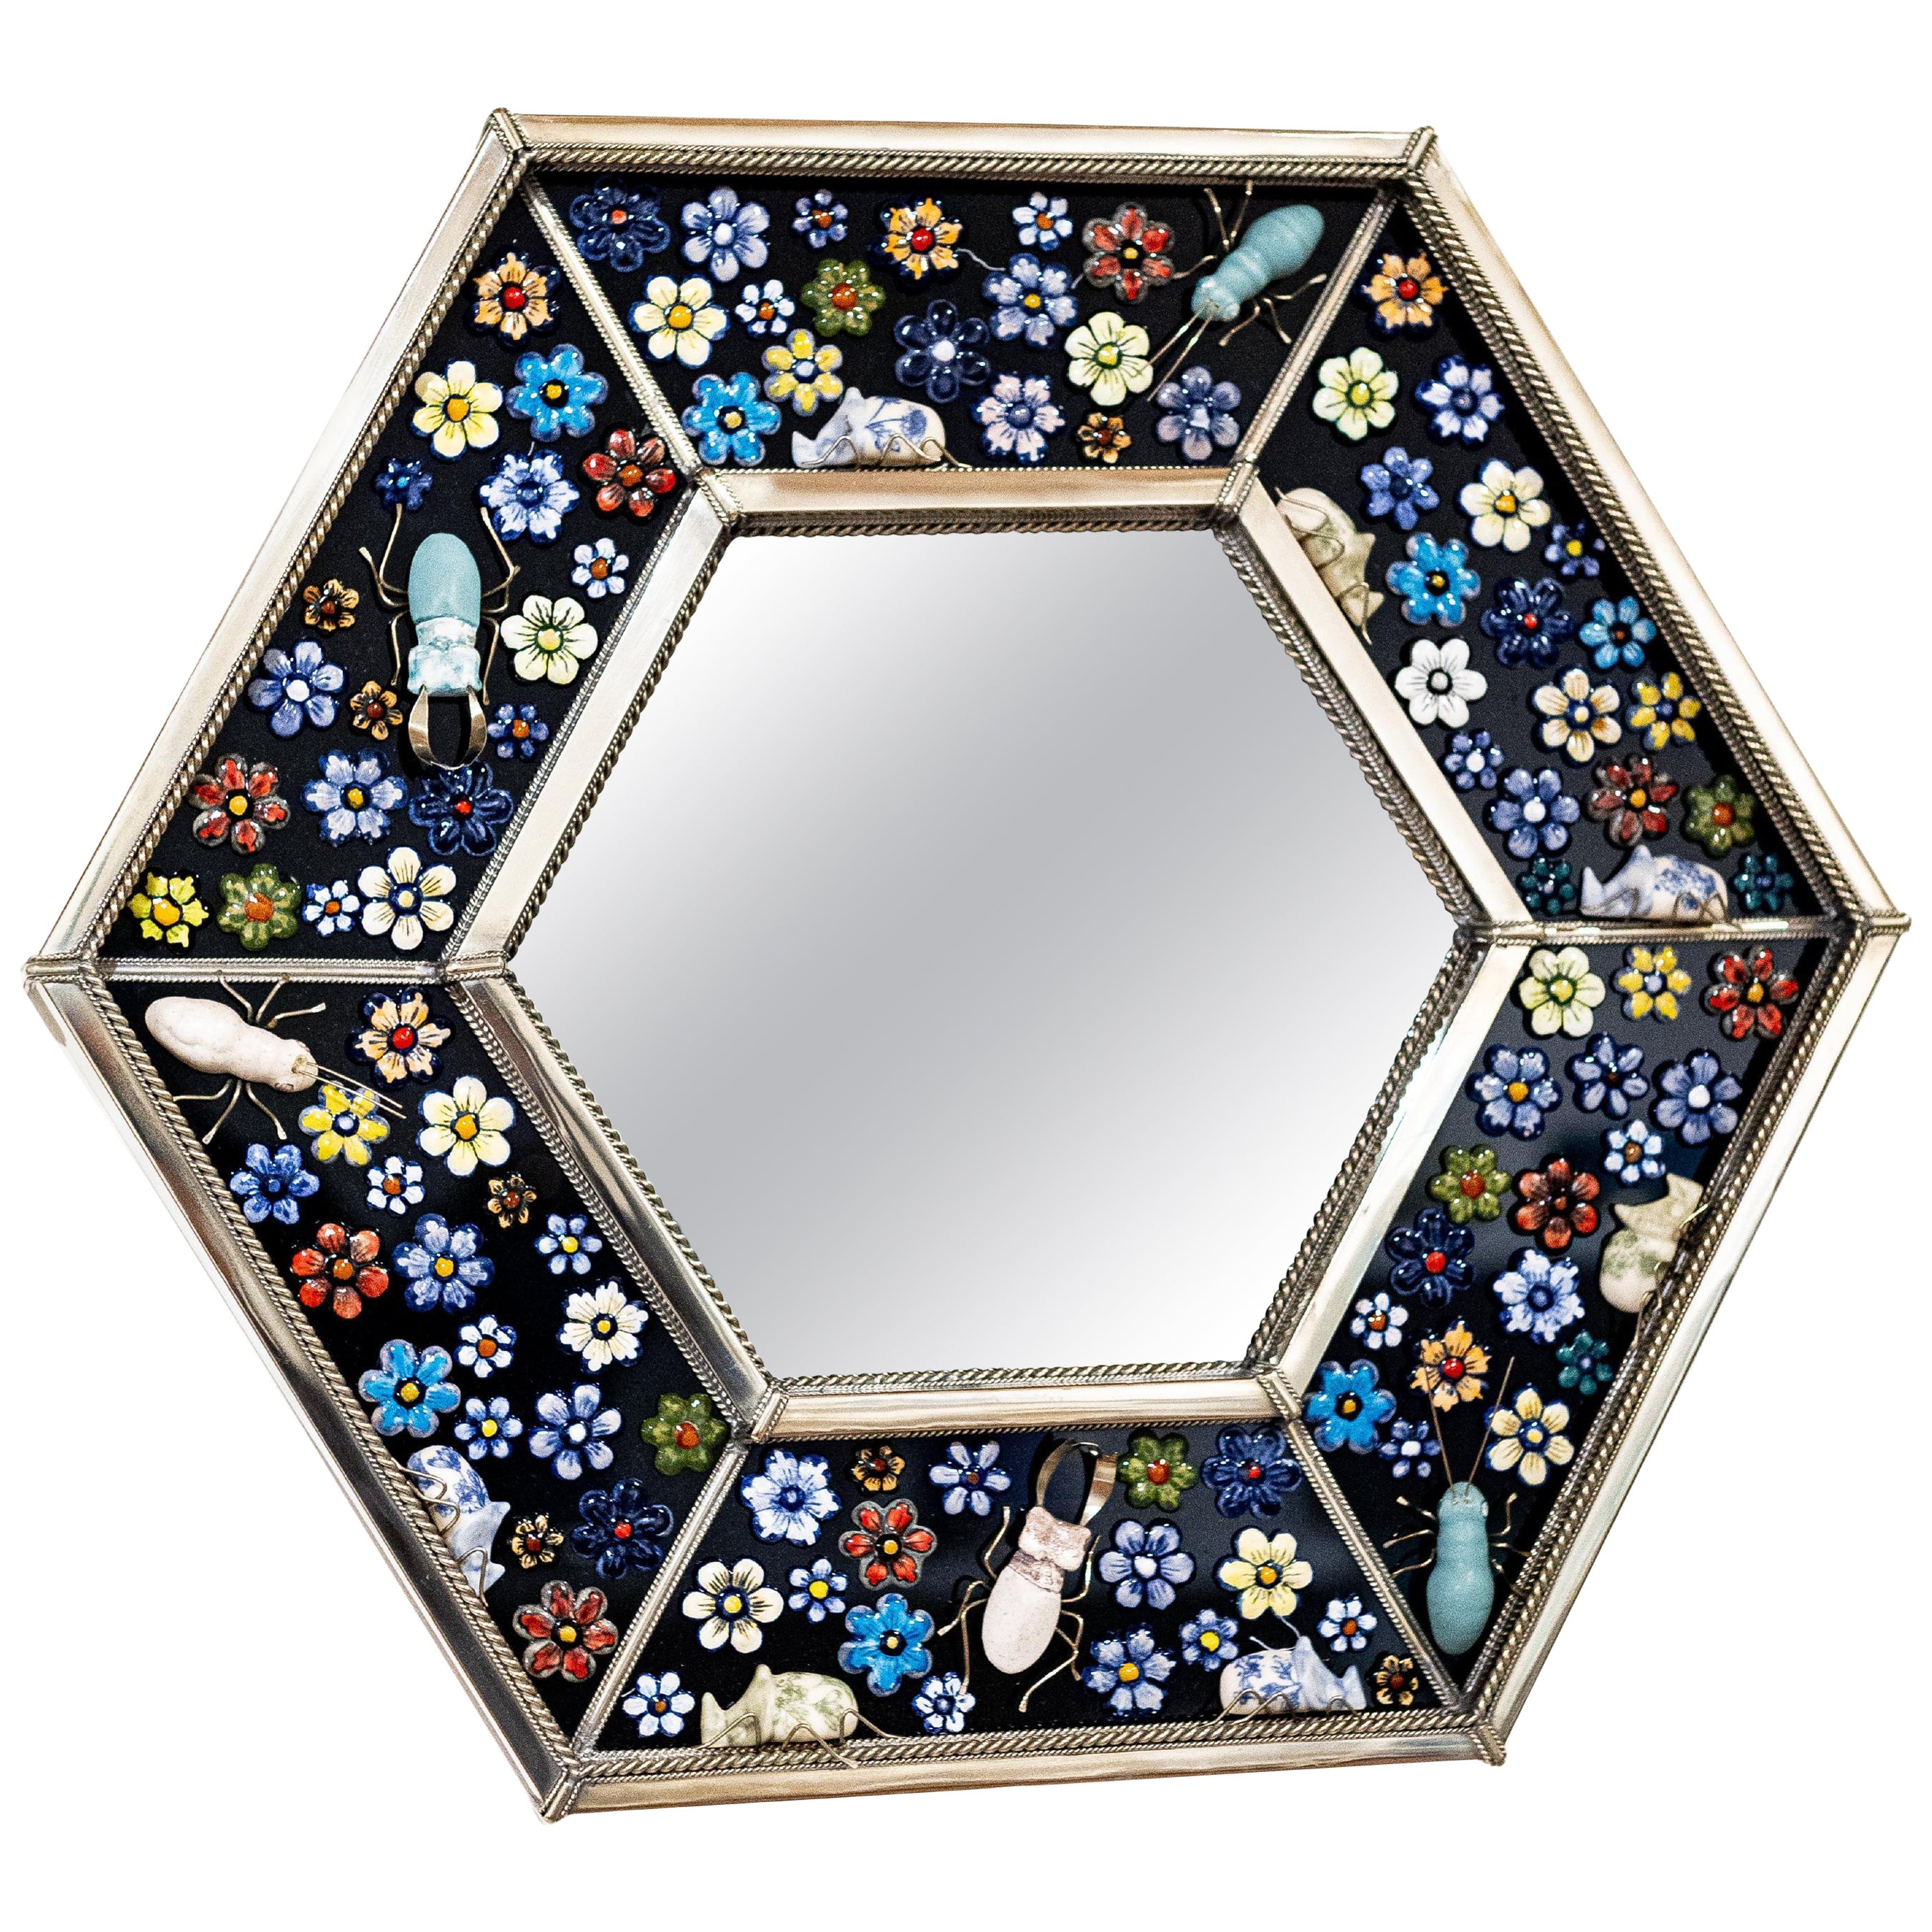 Hexagonal Mirror, Hand Painted Ceramic Flowers and Insects over White Metal